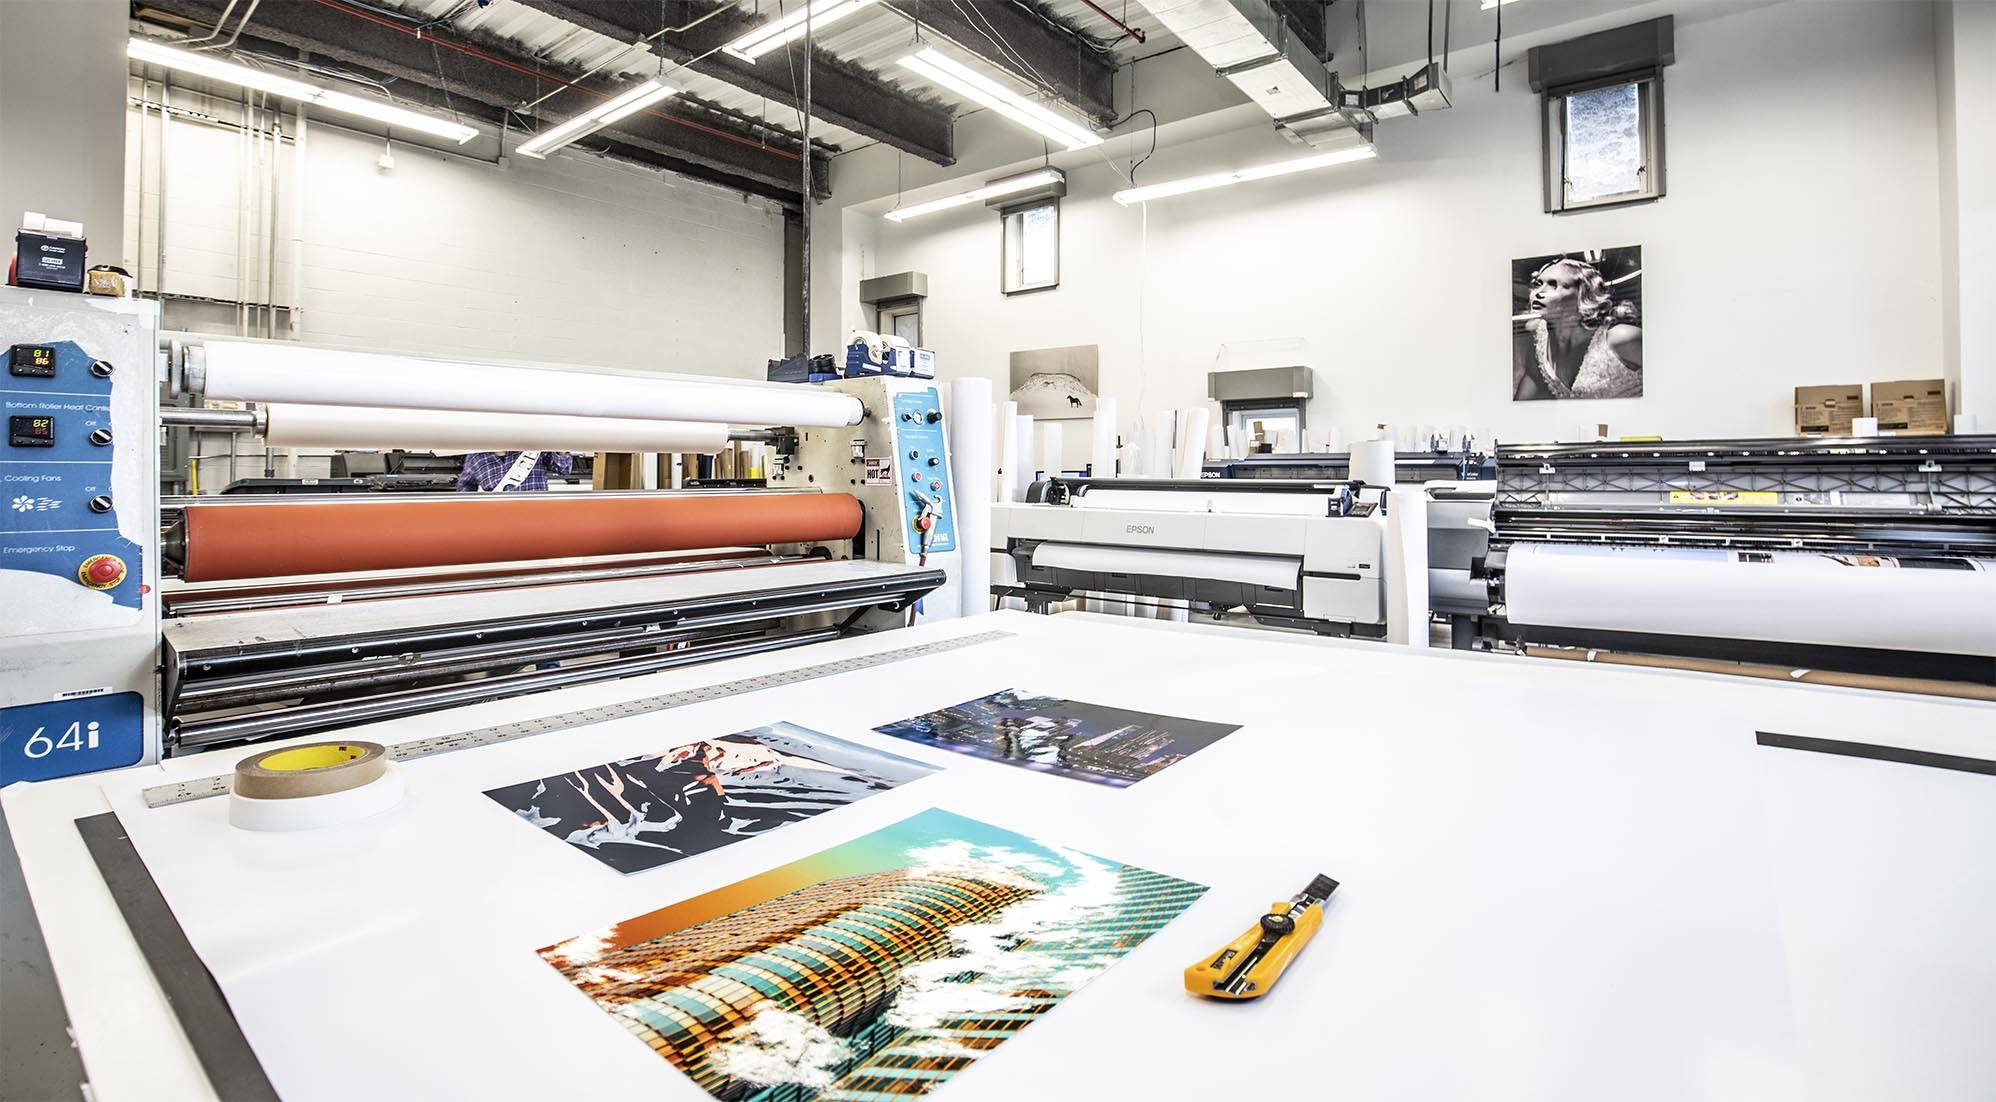 Choosing the Right Printing Material for Your Urgent Project